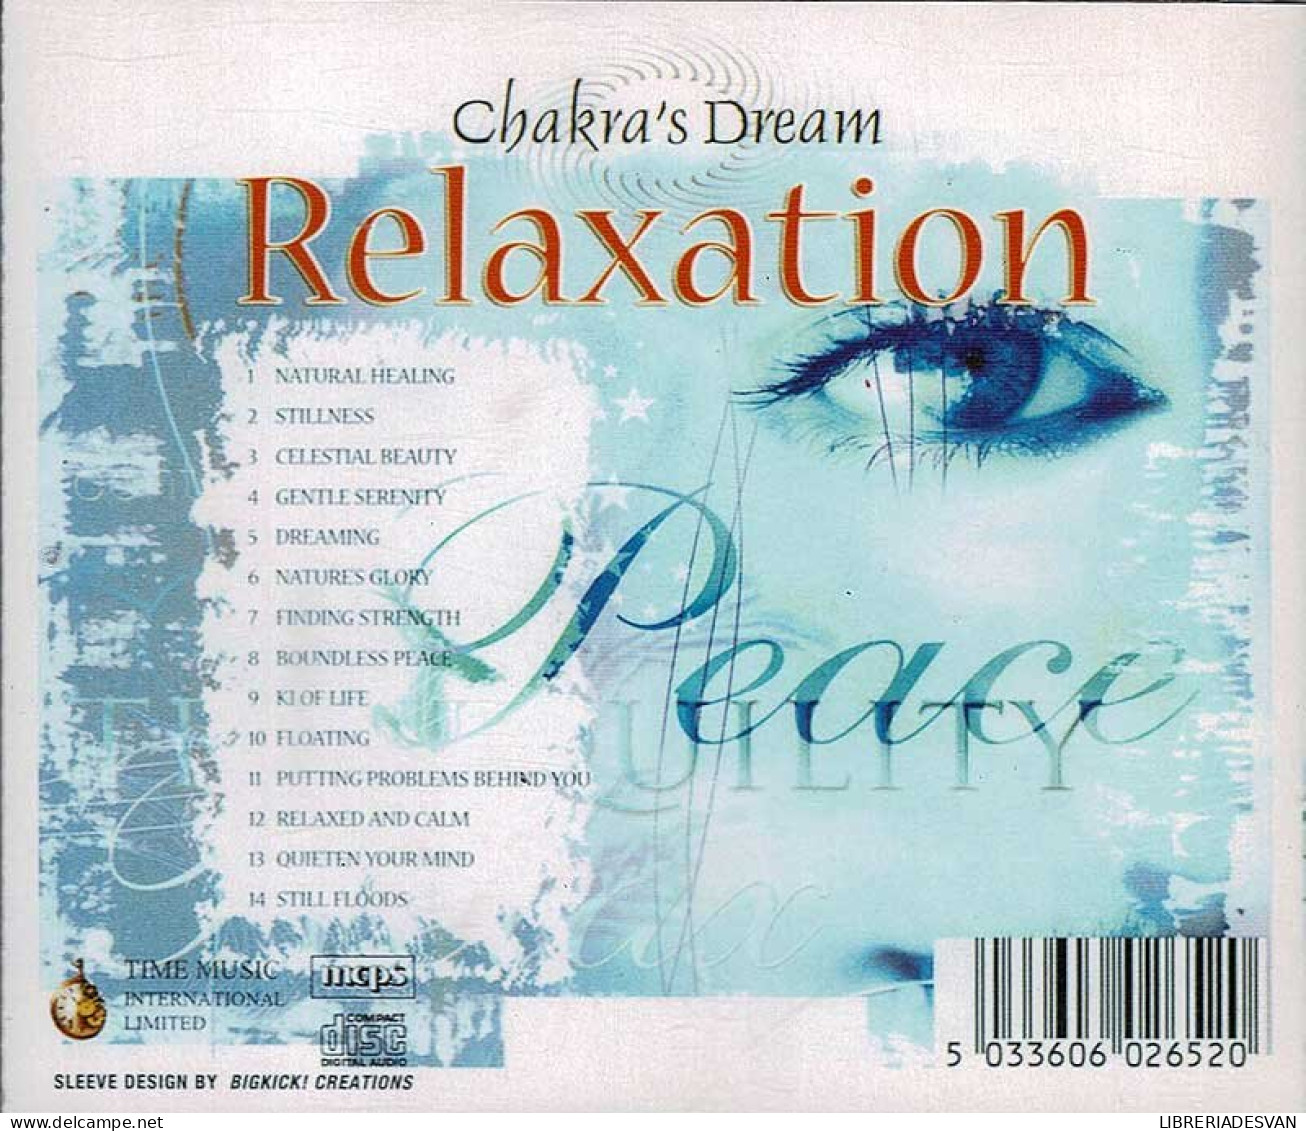 Chakra's Dream - Relaxation. CD - New Age